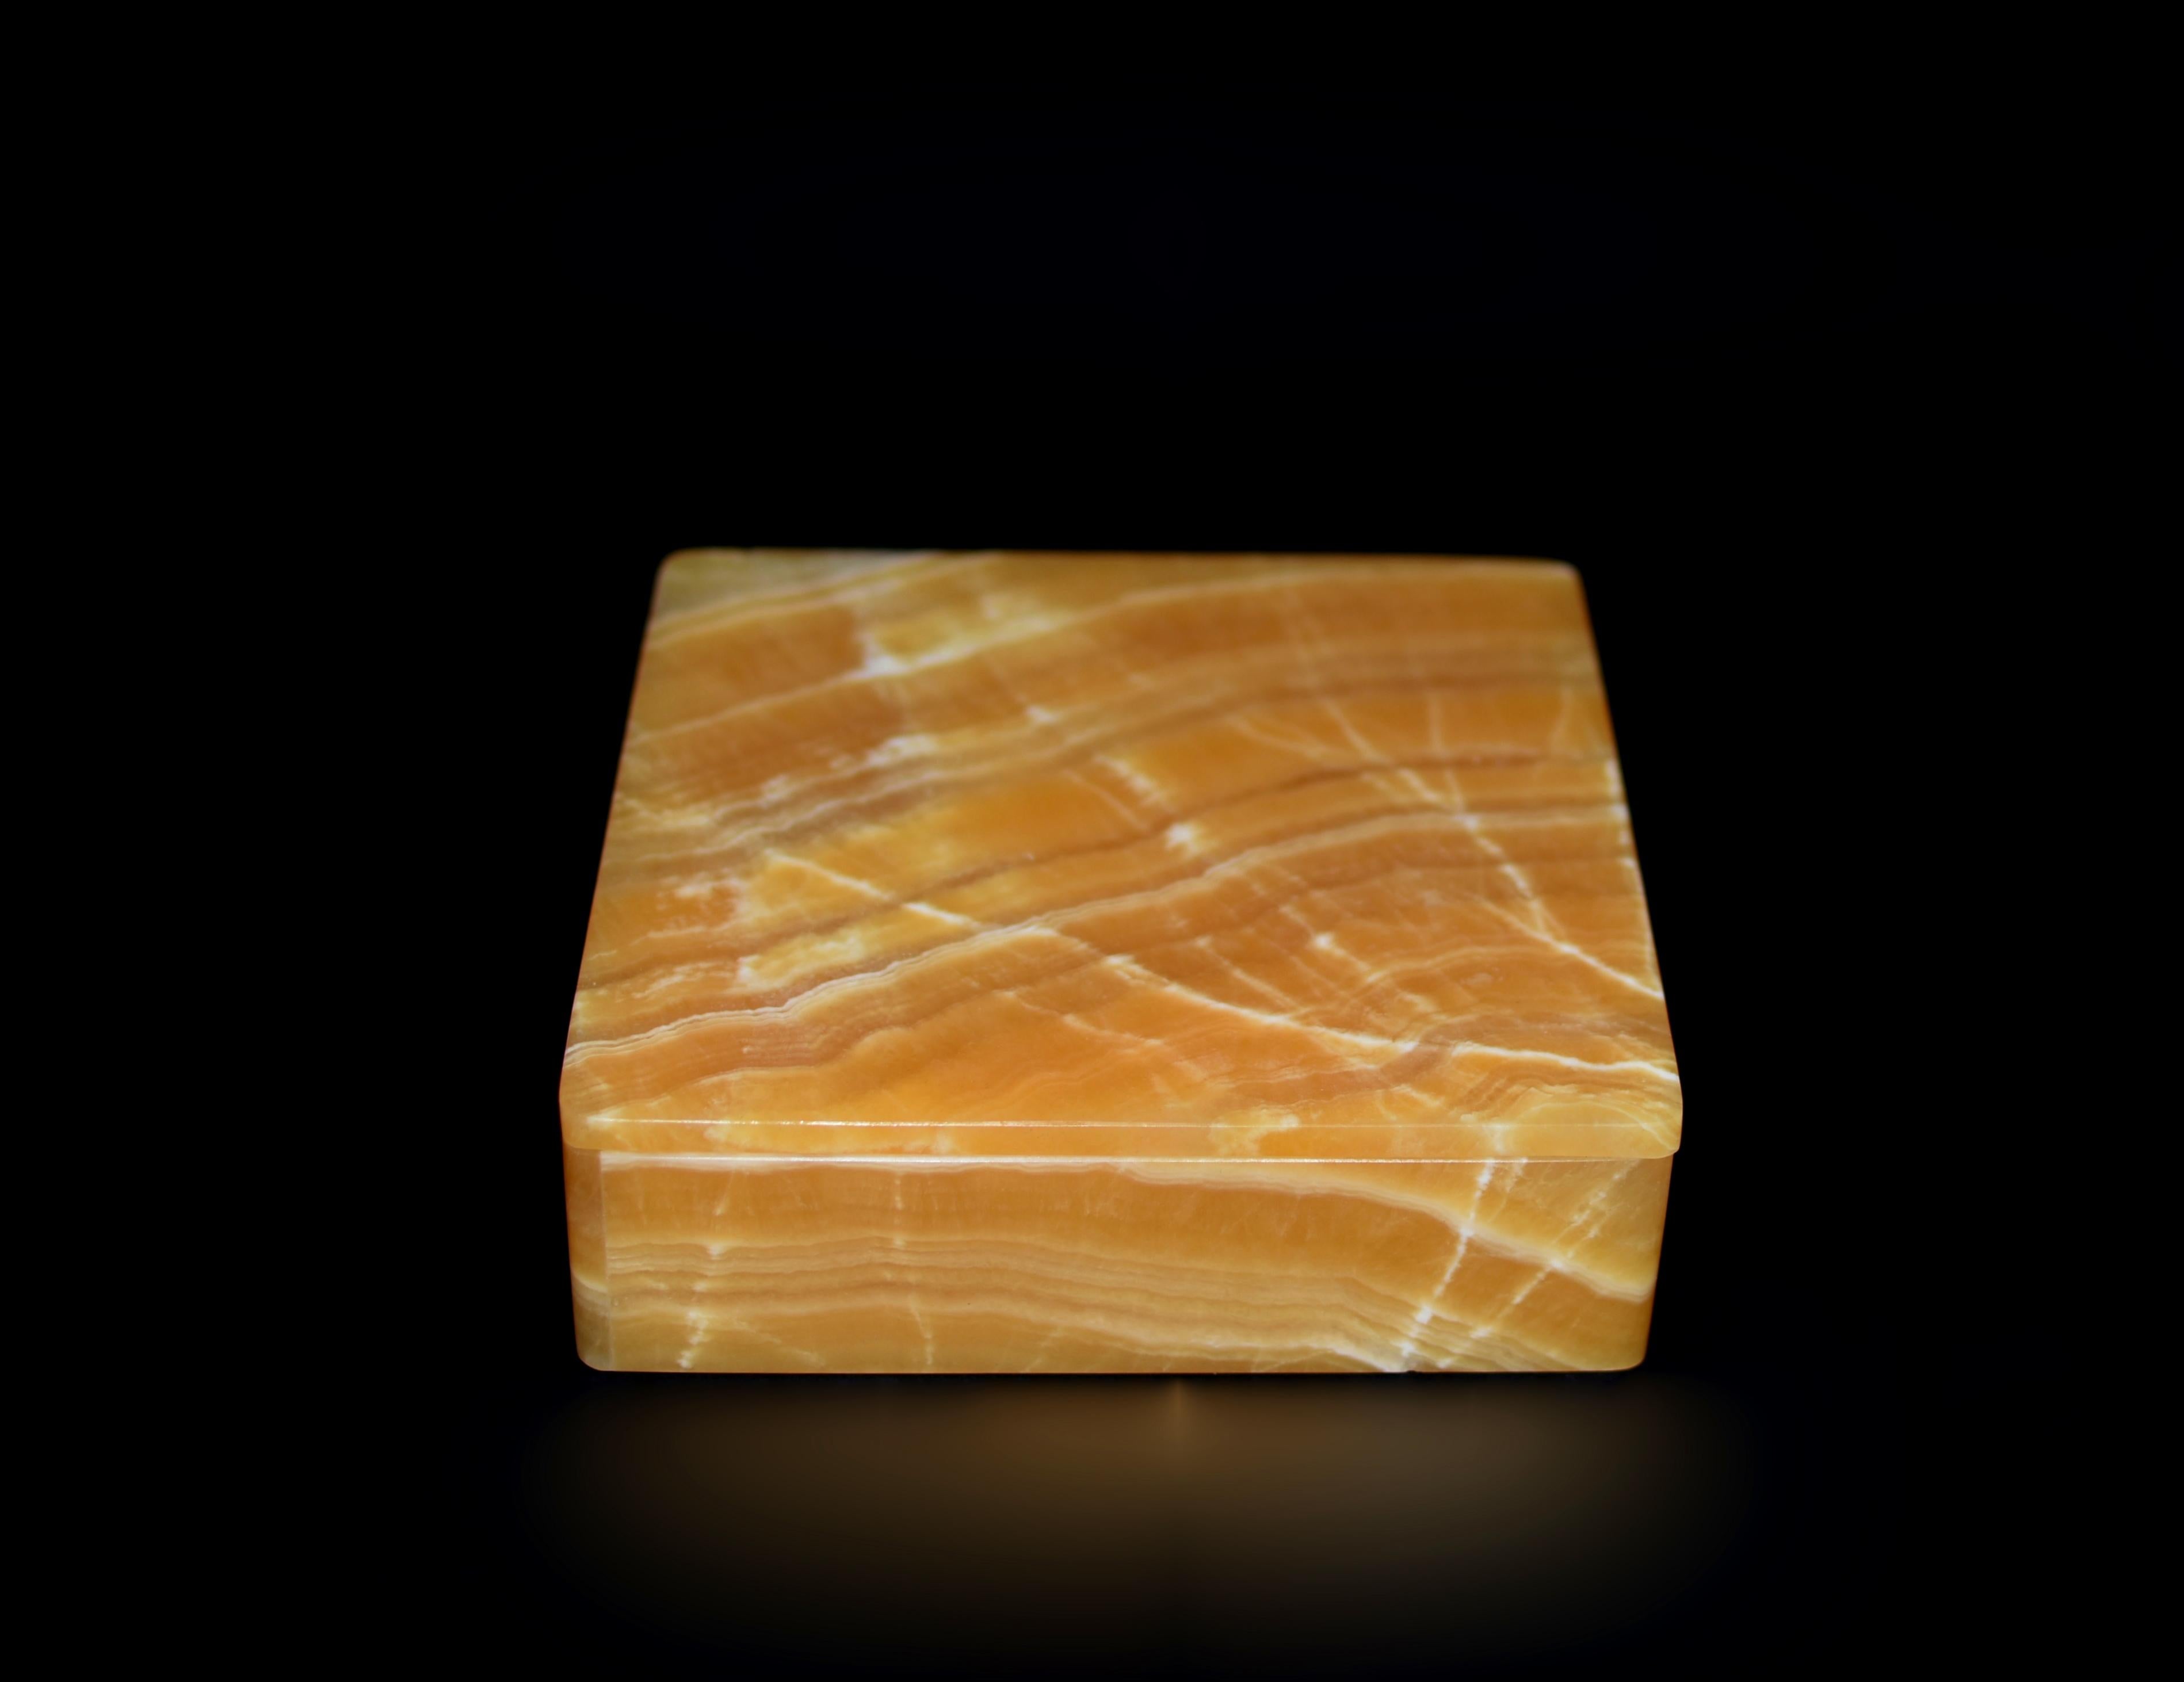 This exquisite creation is crafted from the finest rare honey calcite onyx sourced from Pakistan, using only single boards (full one piece slab) of stones for all sides of the box. Hand made by a master artisan in Italy, showcasing beautiful